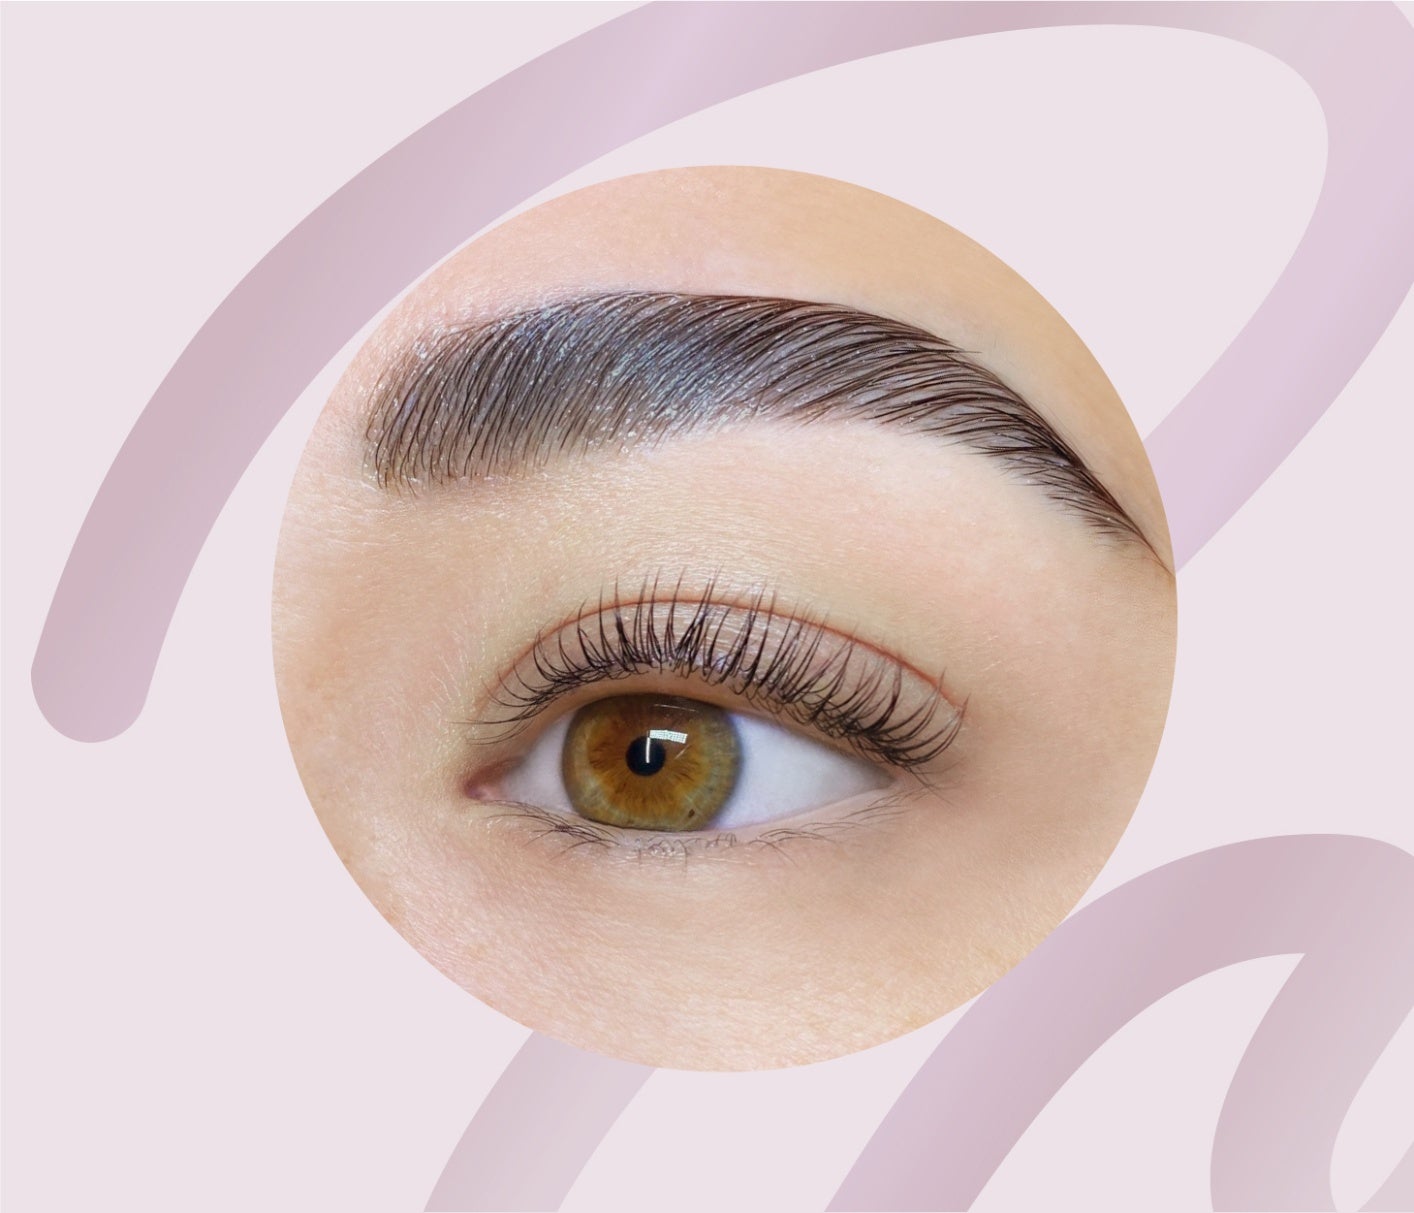 Close-up of a woman's eye showcasing perfectly laminated eyebrows, enhancing the natural beauty of the brow line.